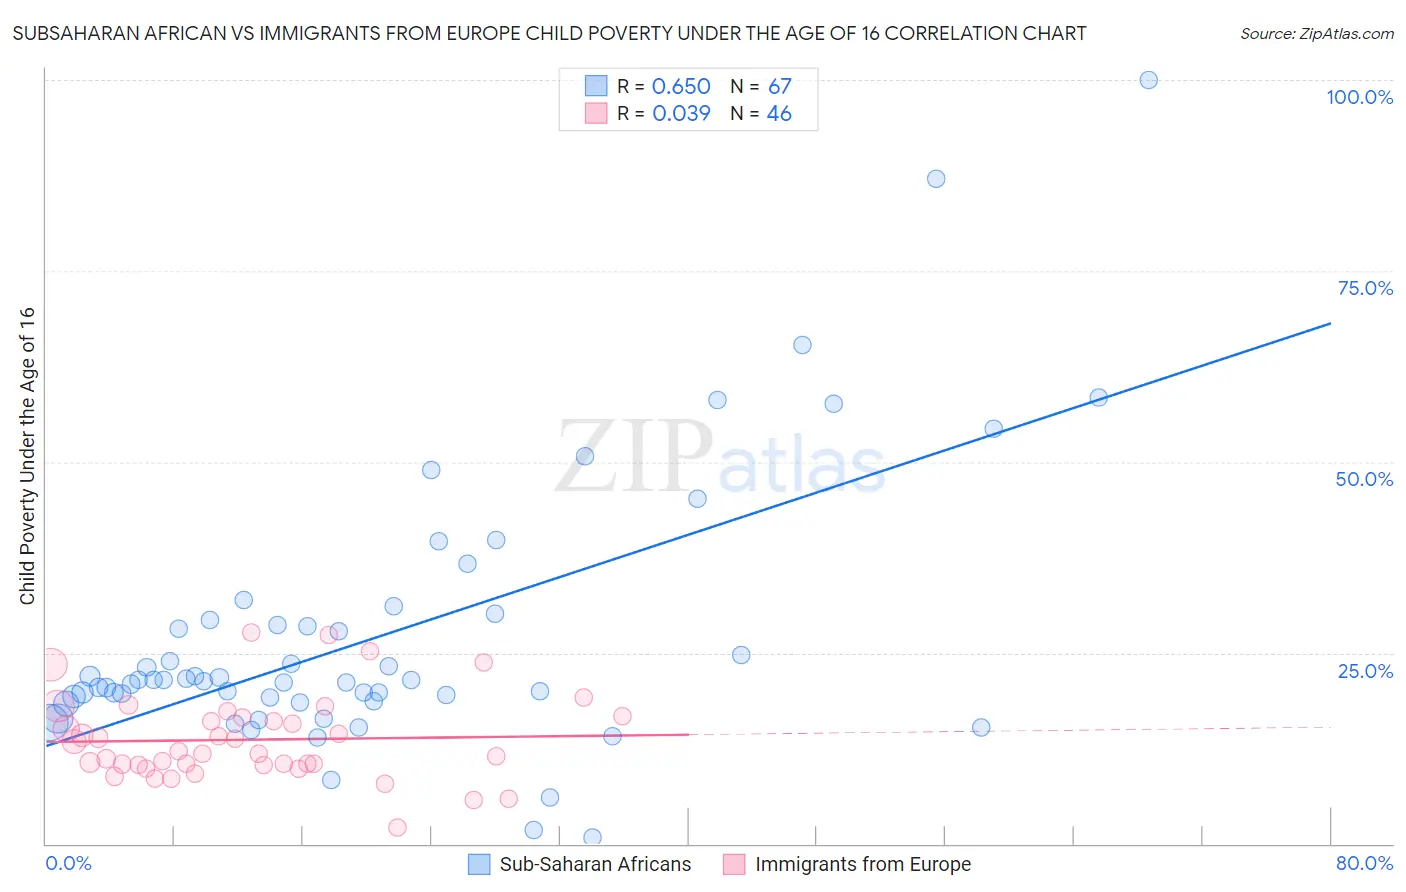 Subsaharan African vs Immigrants from Europe Child Poverty Under the Age of 16